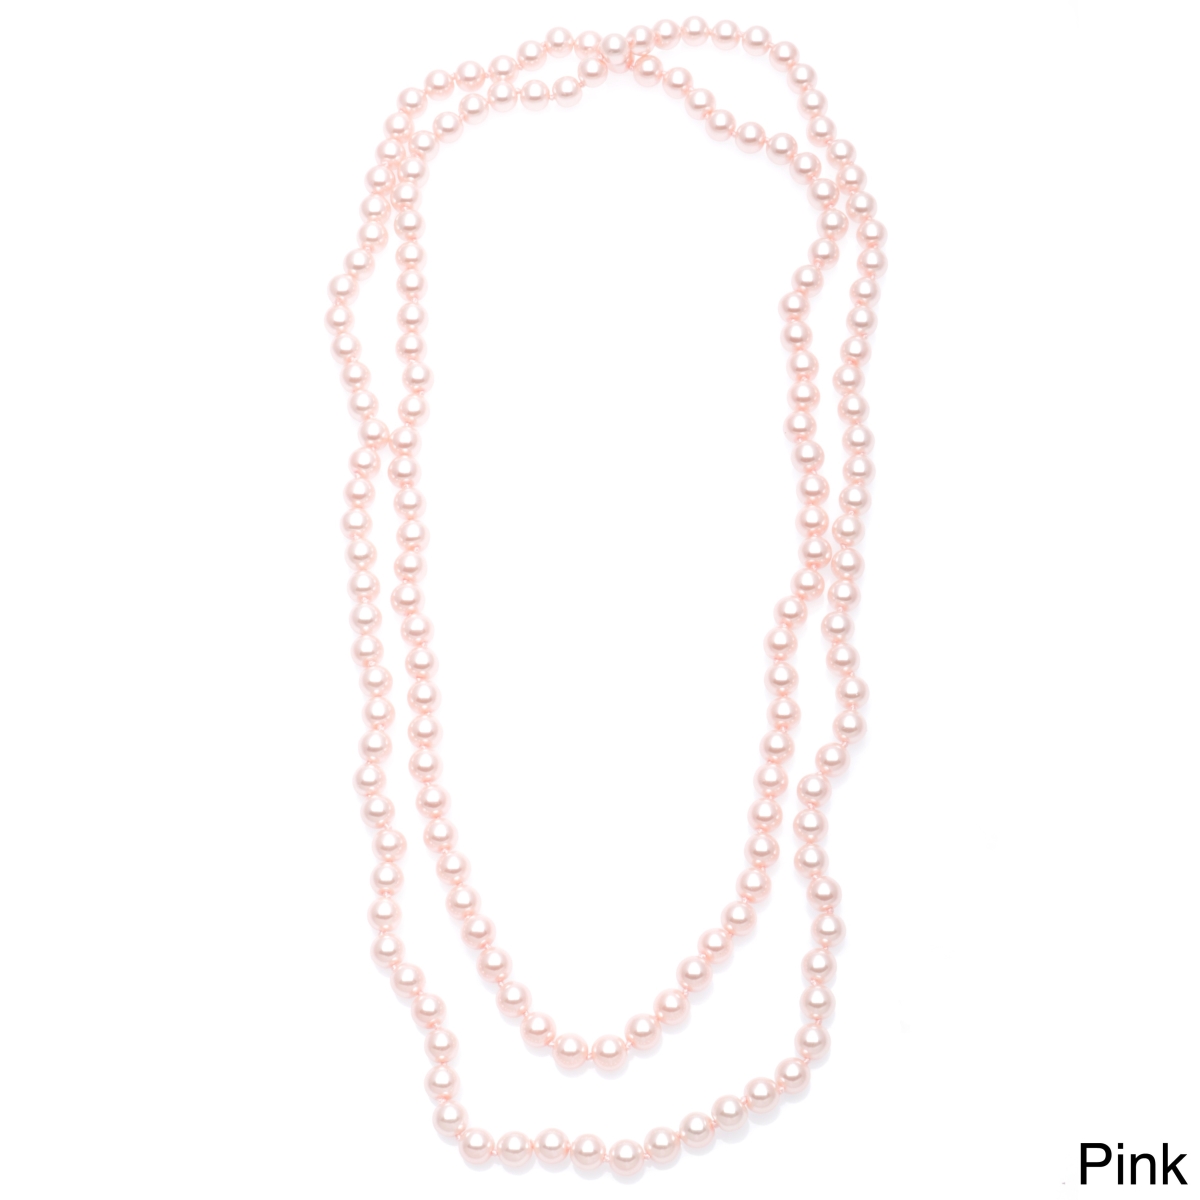 Picture of J&H Designs 854-N-Pink Hand-knotted Endless 54-inch Glass Pearl Necklace (8-9 mm)